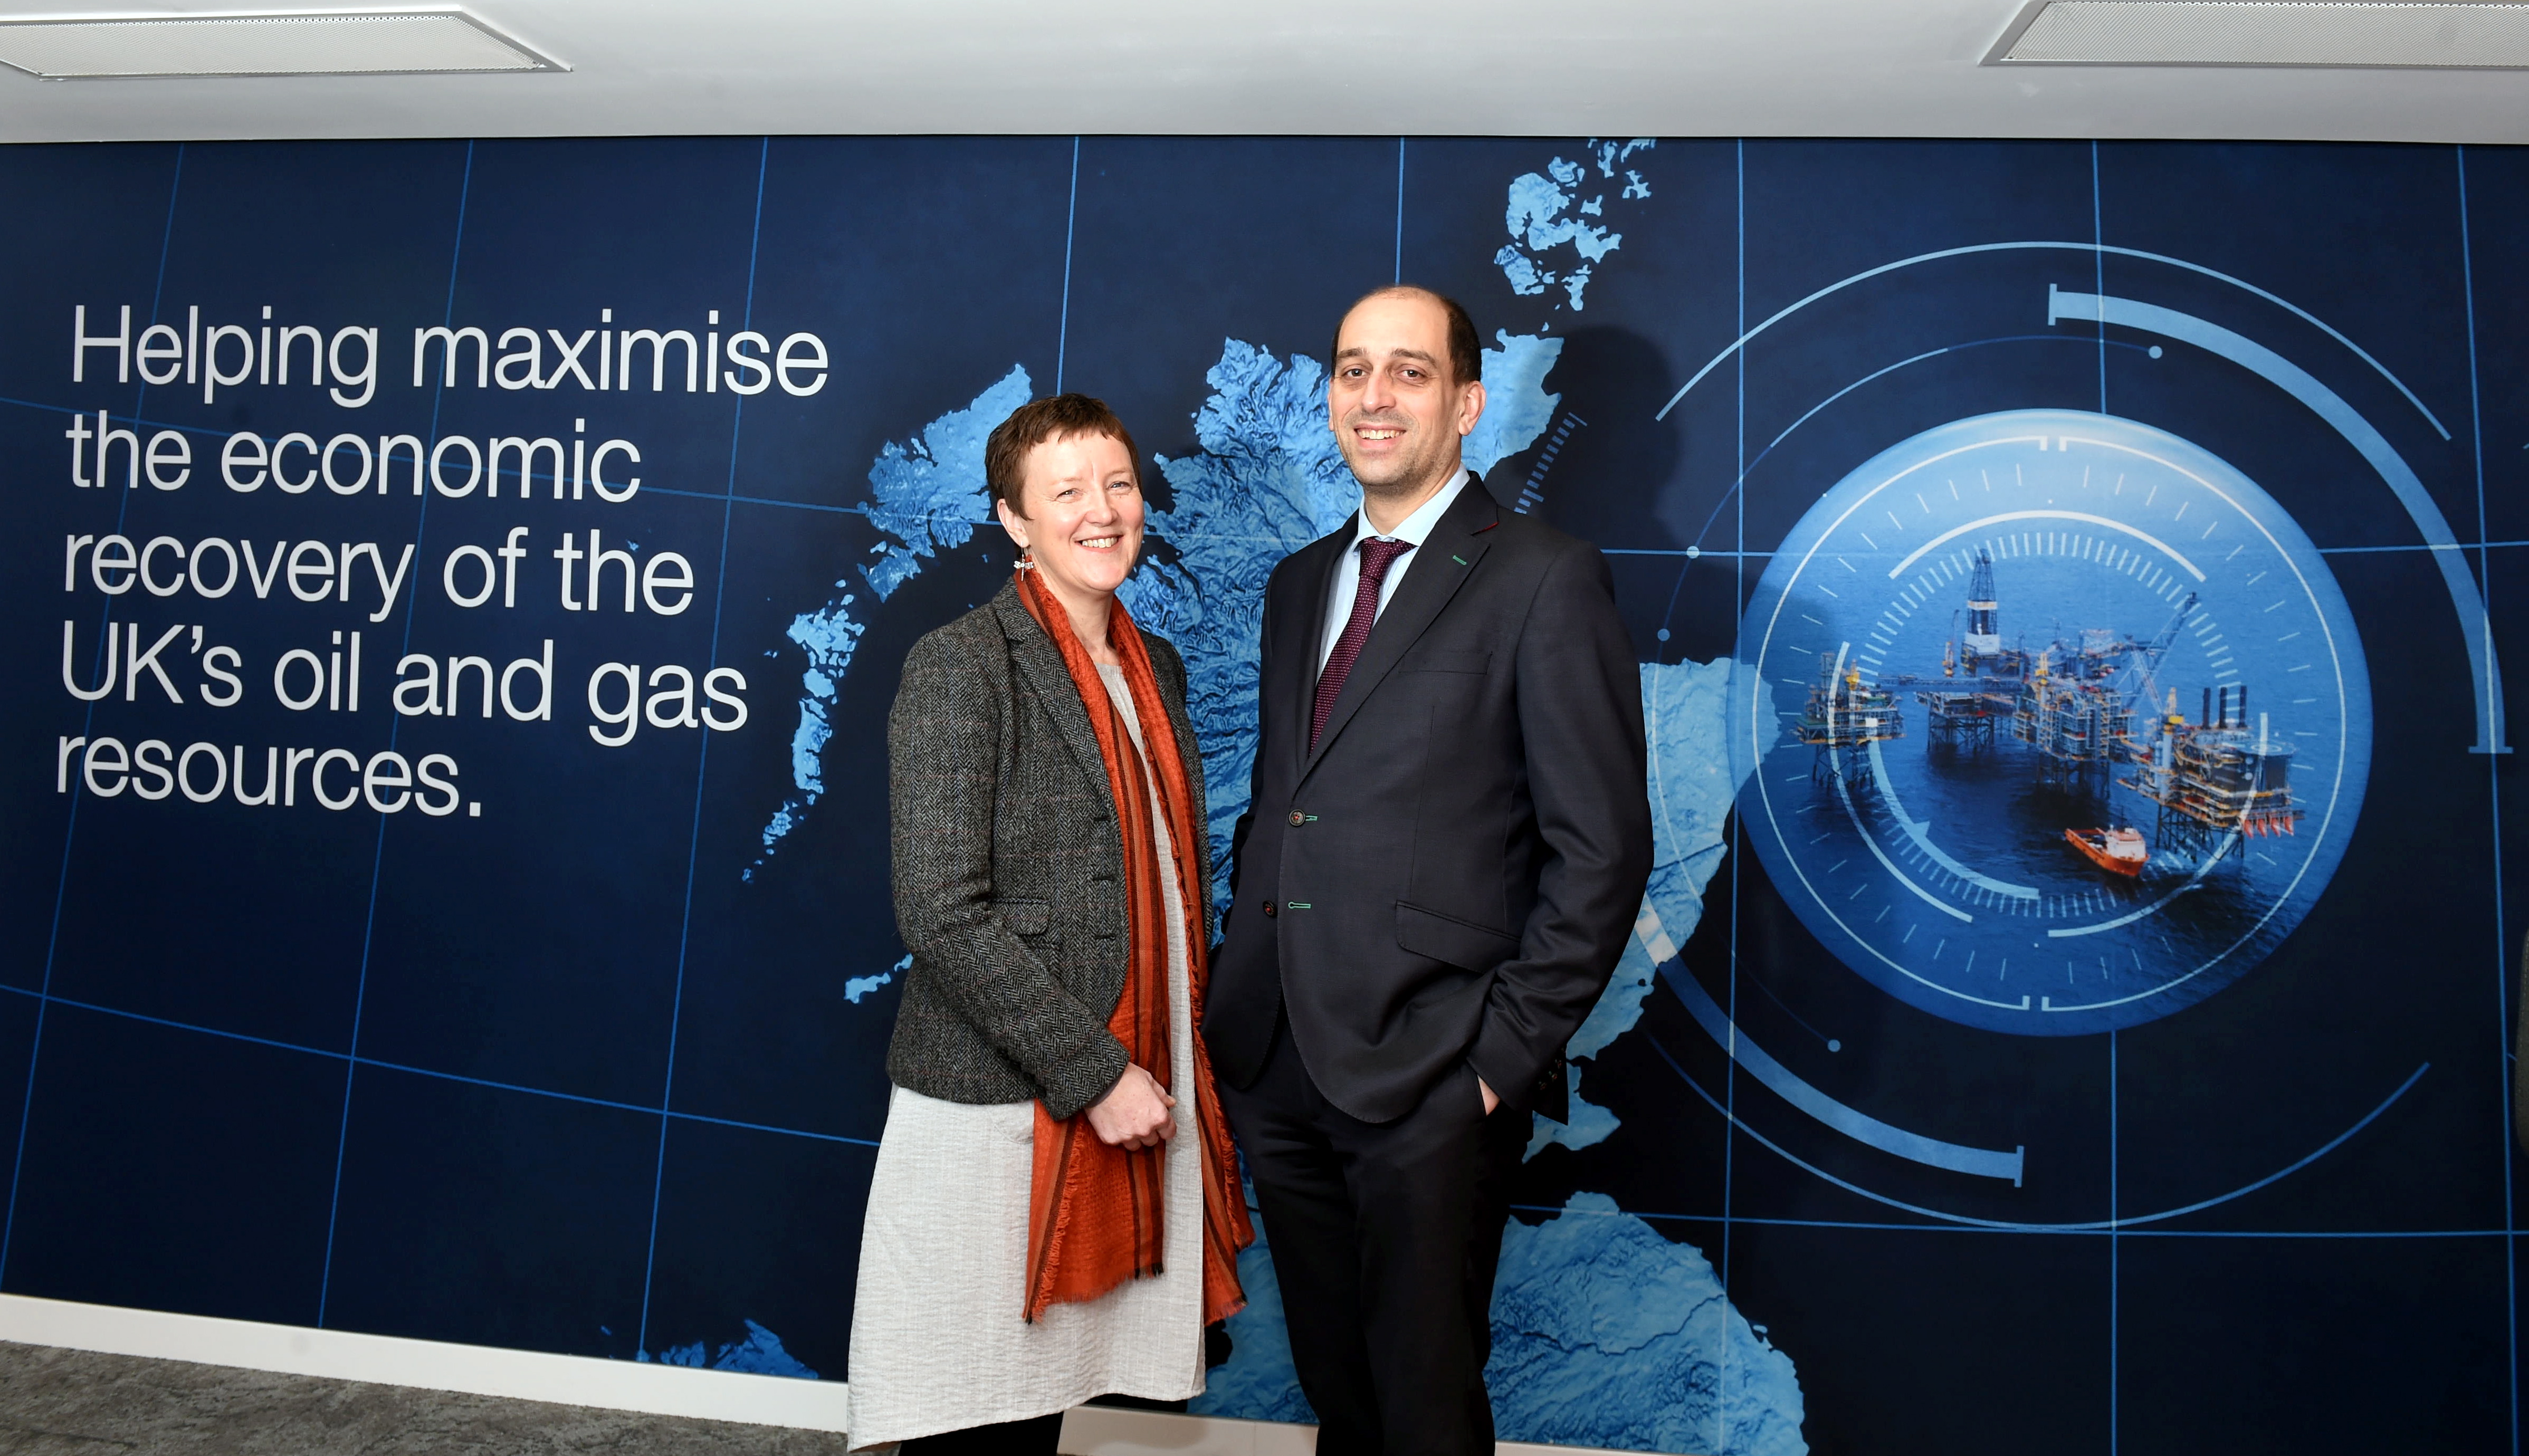 The Oil and Gas Authority's West of Shetland manager, Brenda Wyllie and Nick Richardson, Head of Exploration and New Ventures.